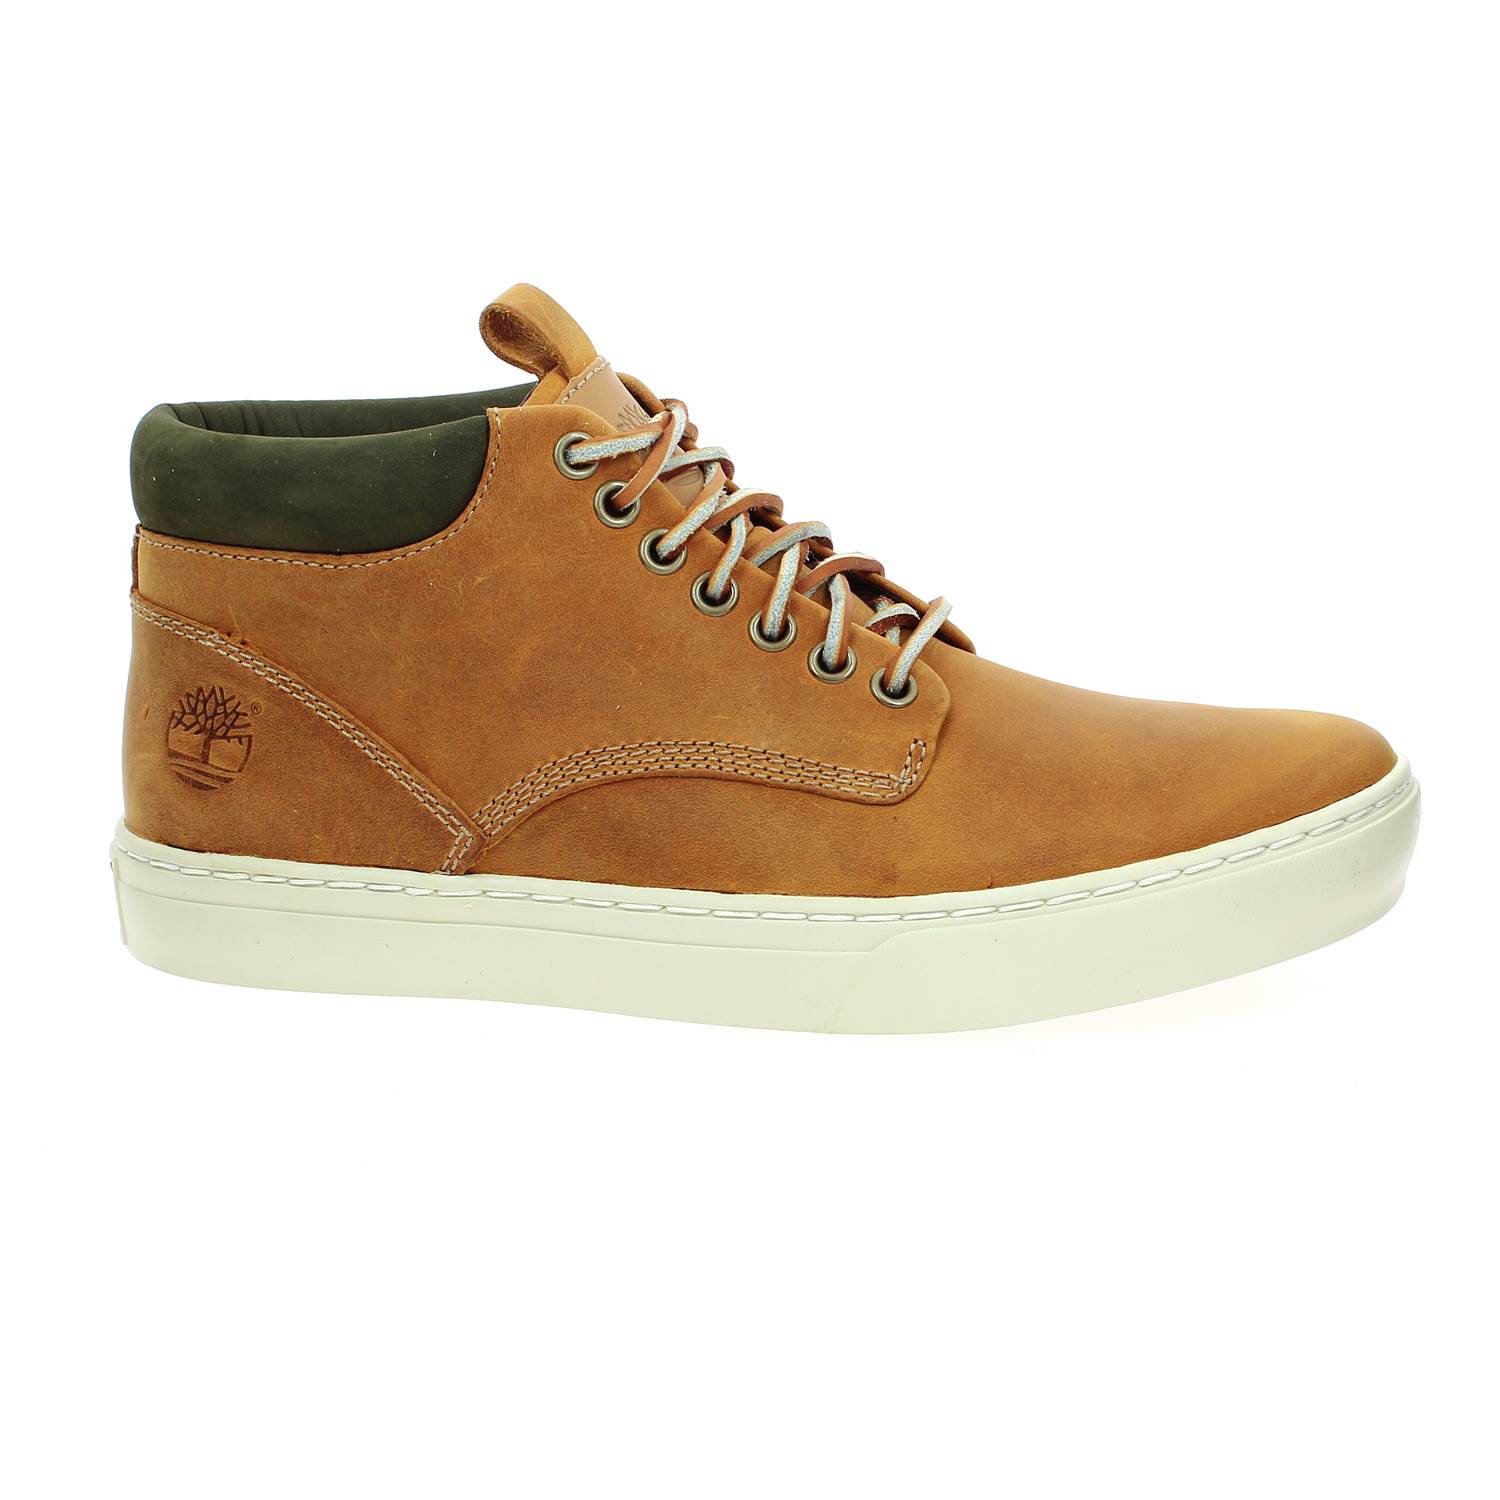 02 - CUPSOLE - TIMBERLAND - Boots et bottines - Cuir